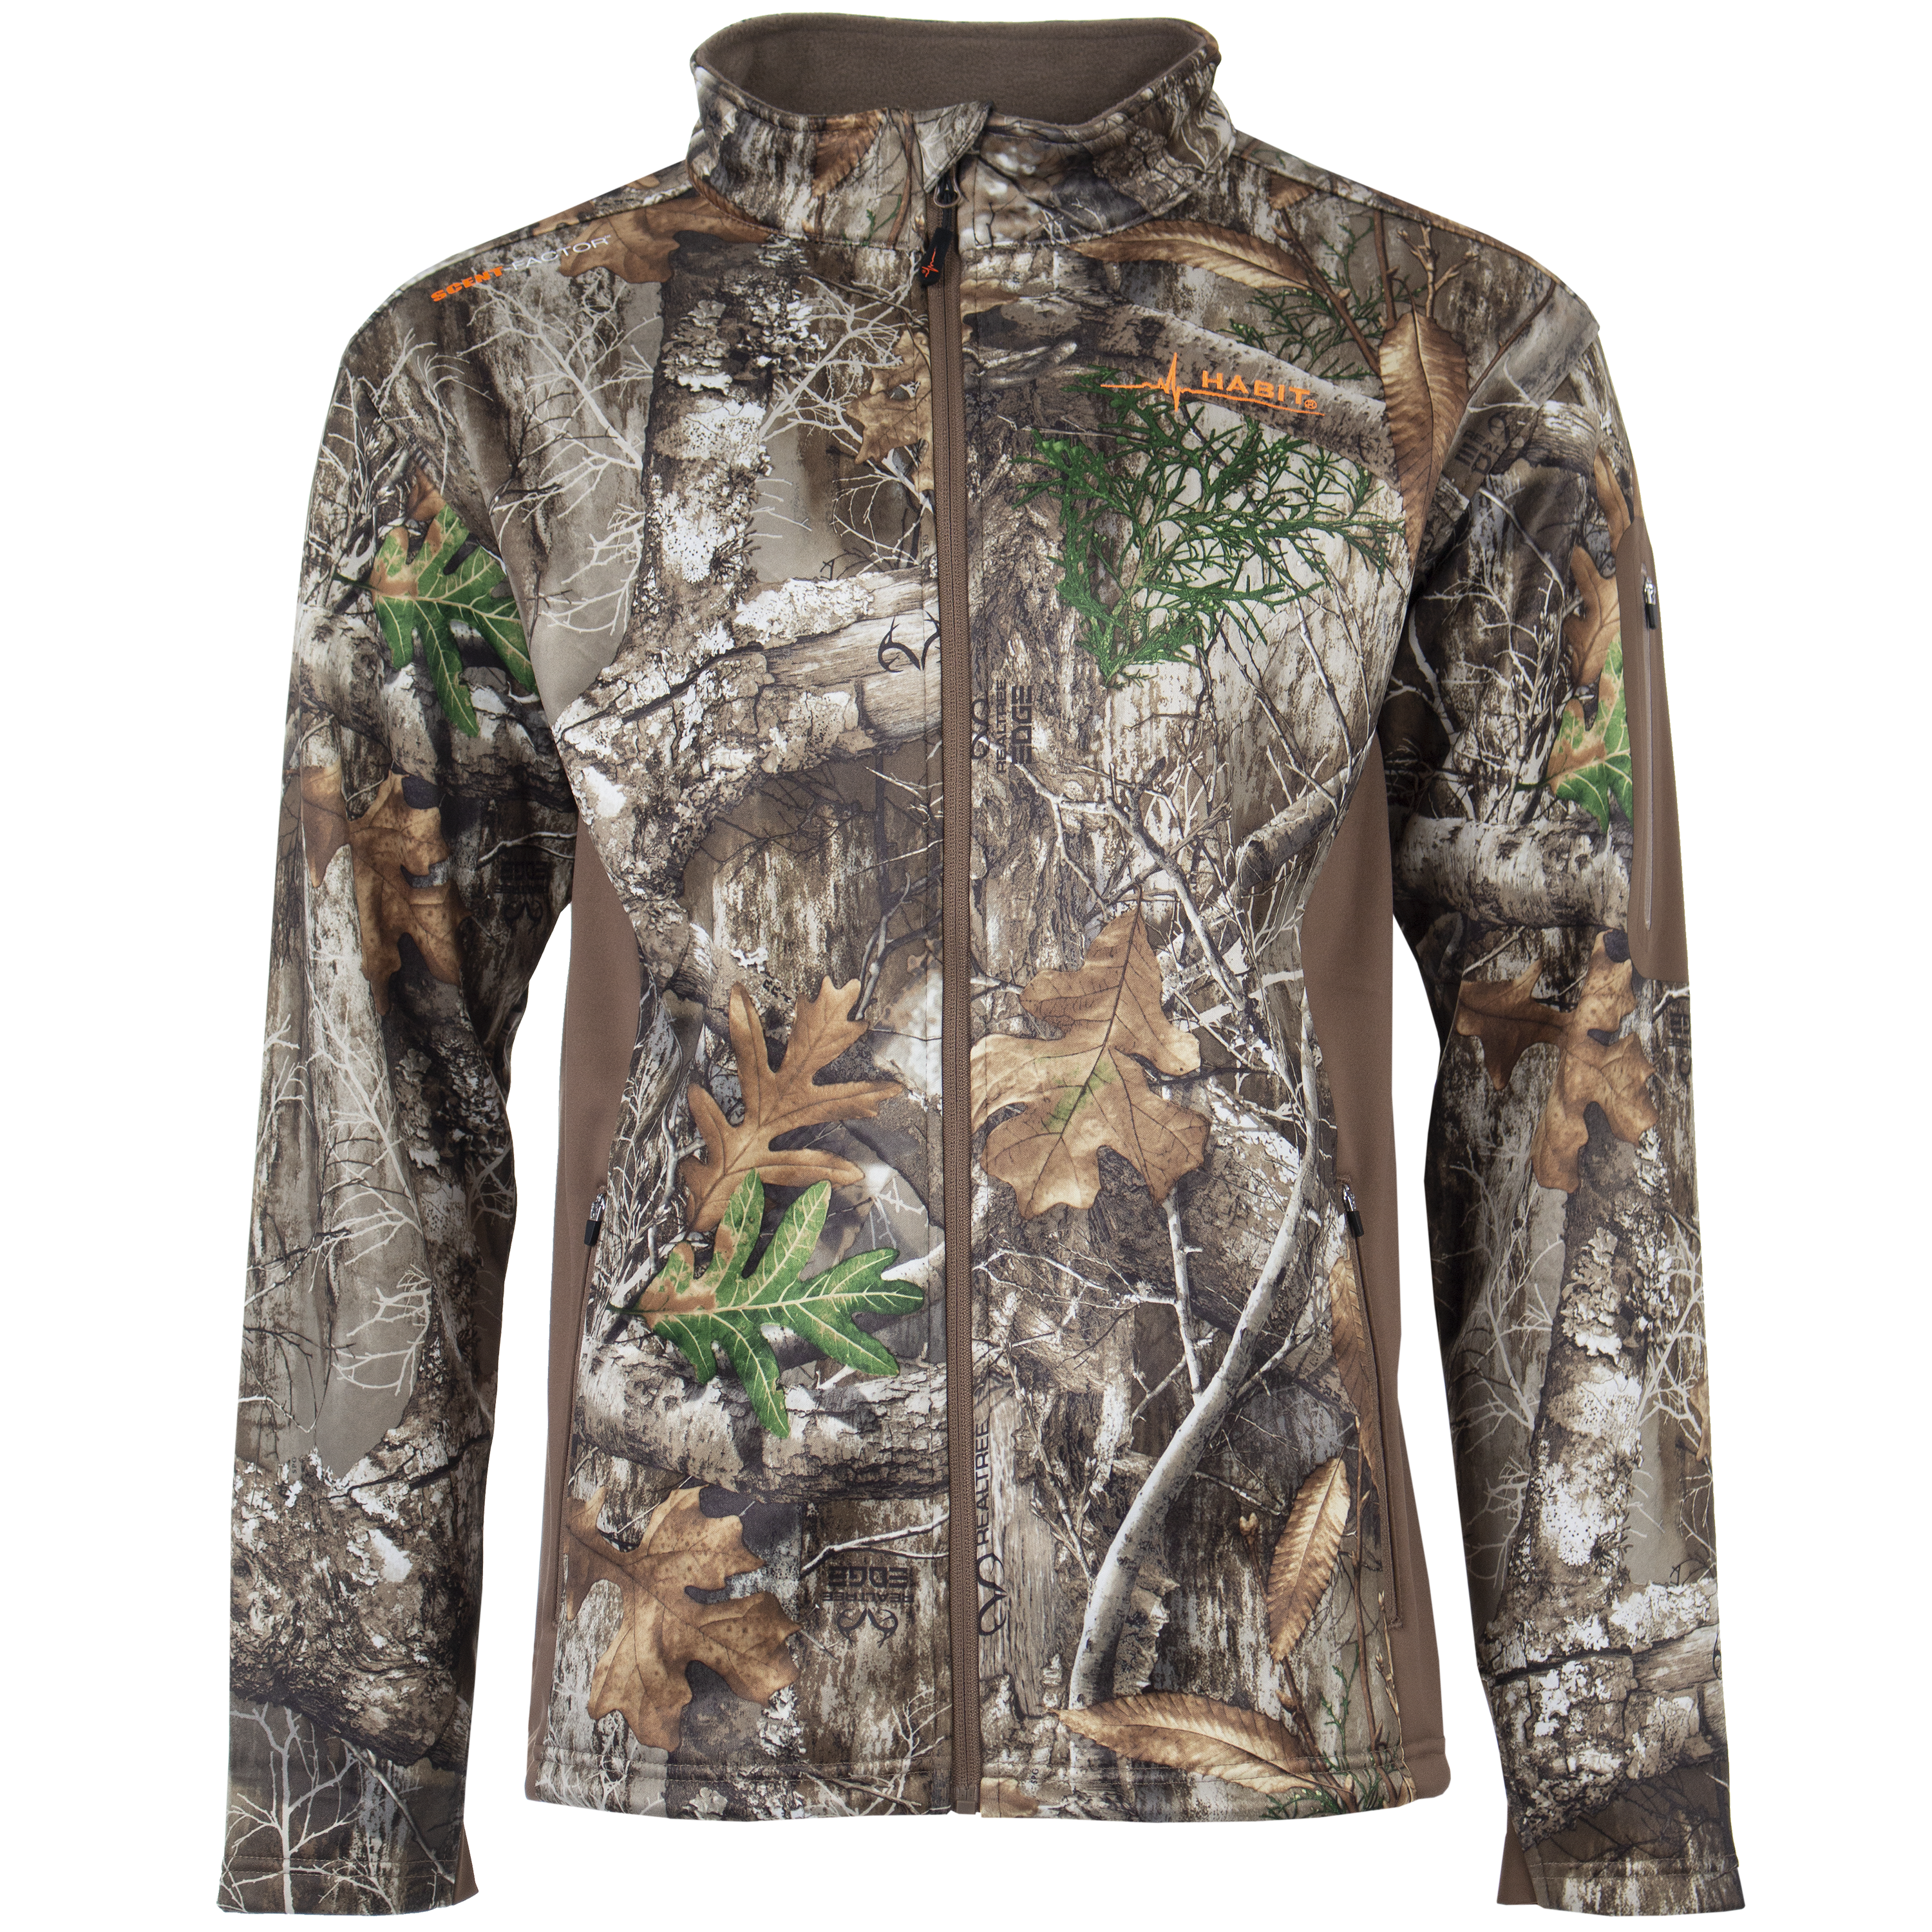 Realtree Men's Scent Factor Hunting Jacket, Realtree Edge, Size